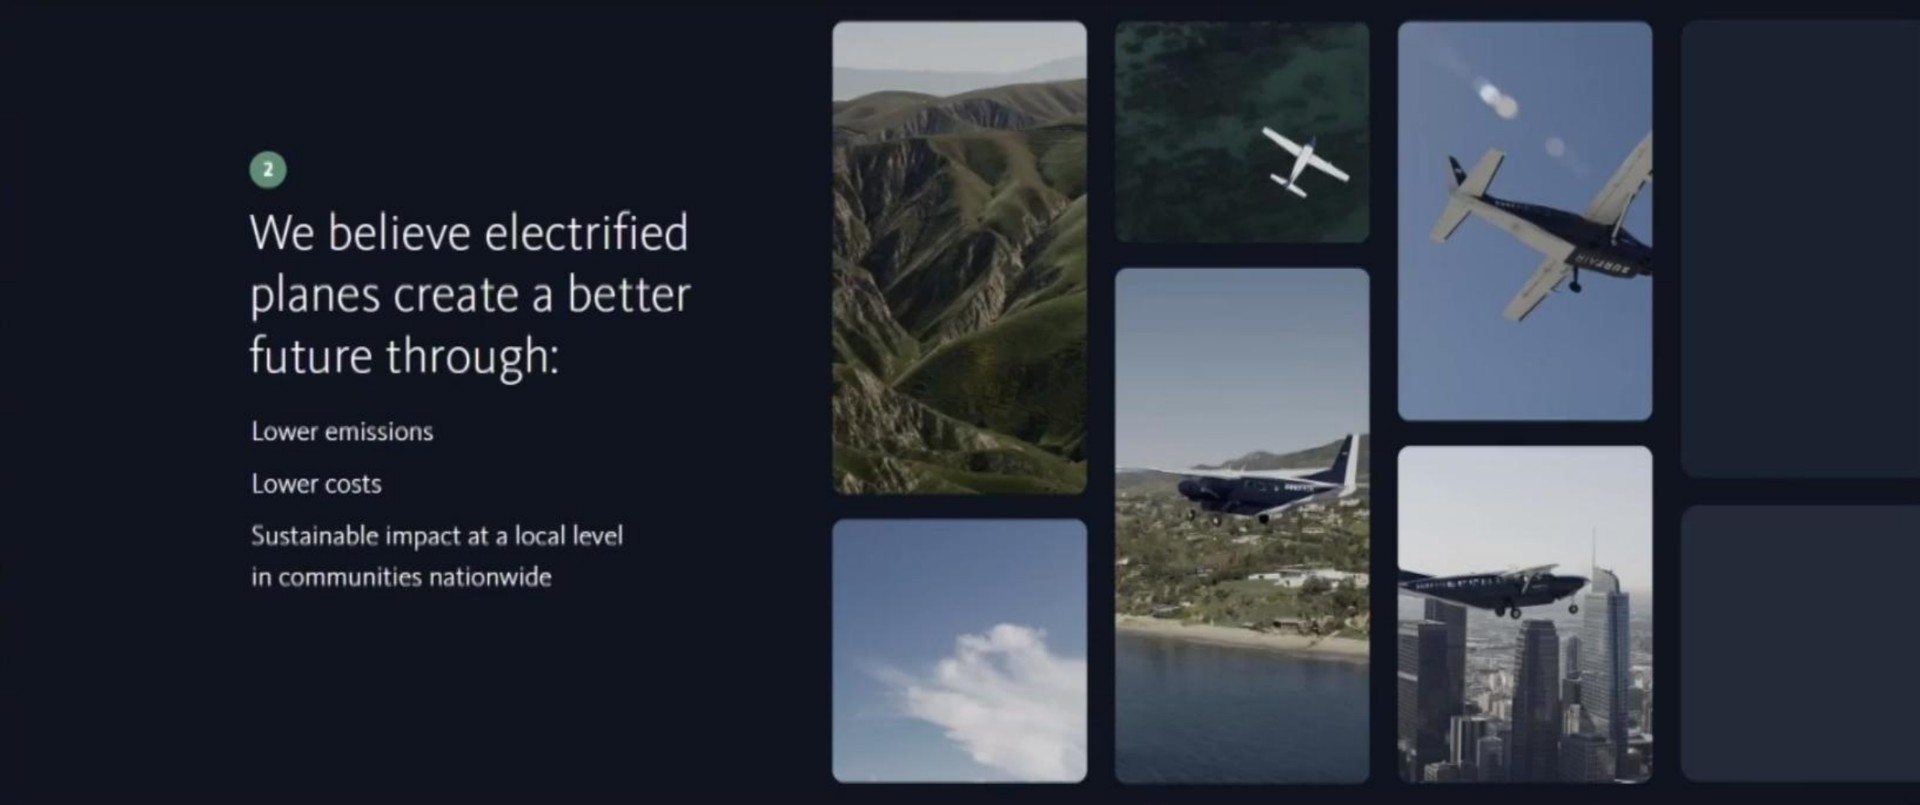 we believe electrified planes create a better future through lower costs lower emissions sustainable impact at a local level in communities nationwide | Surf Air